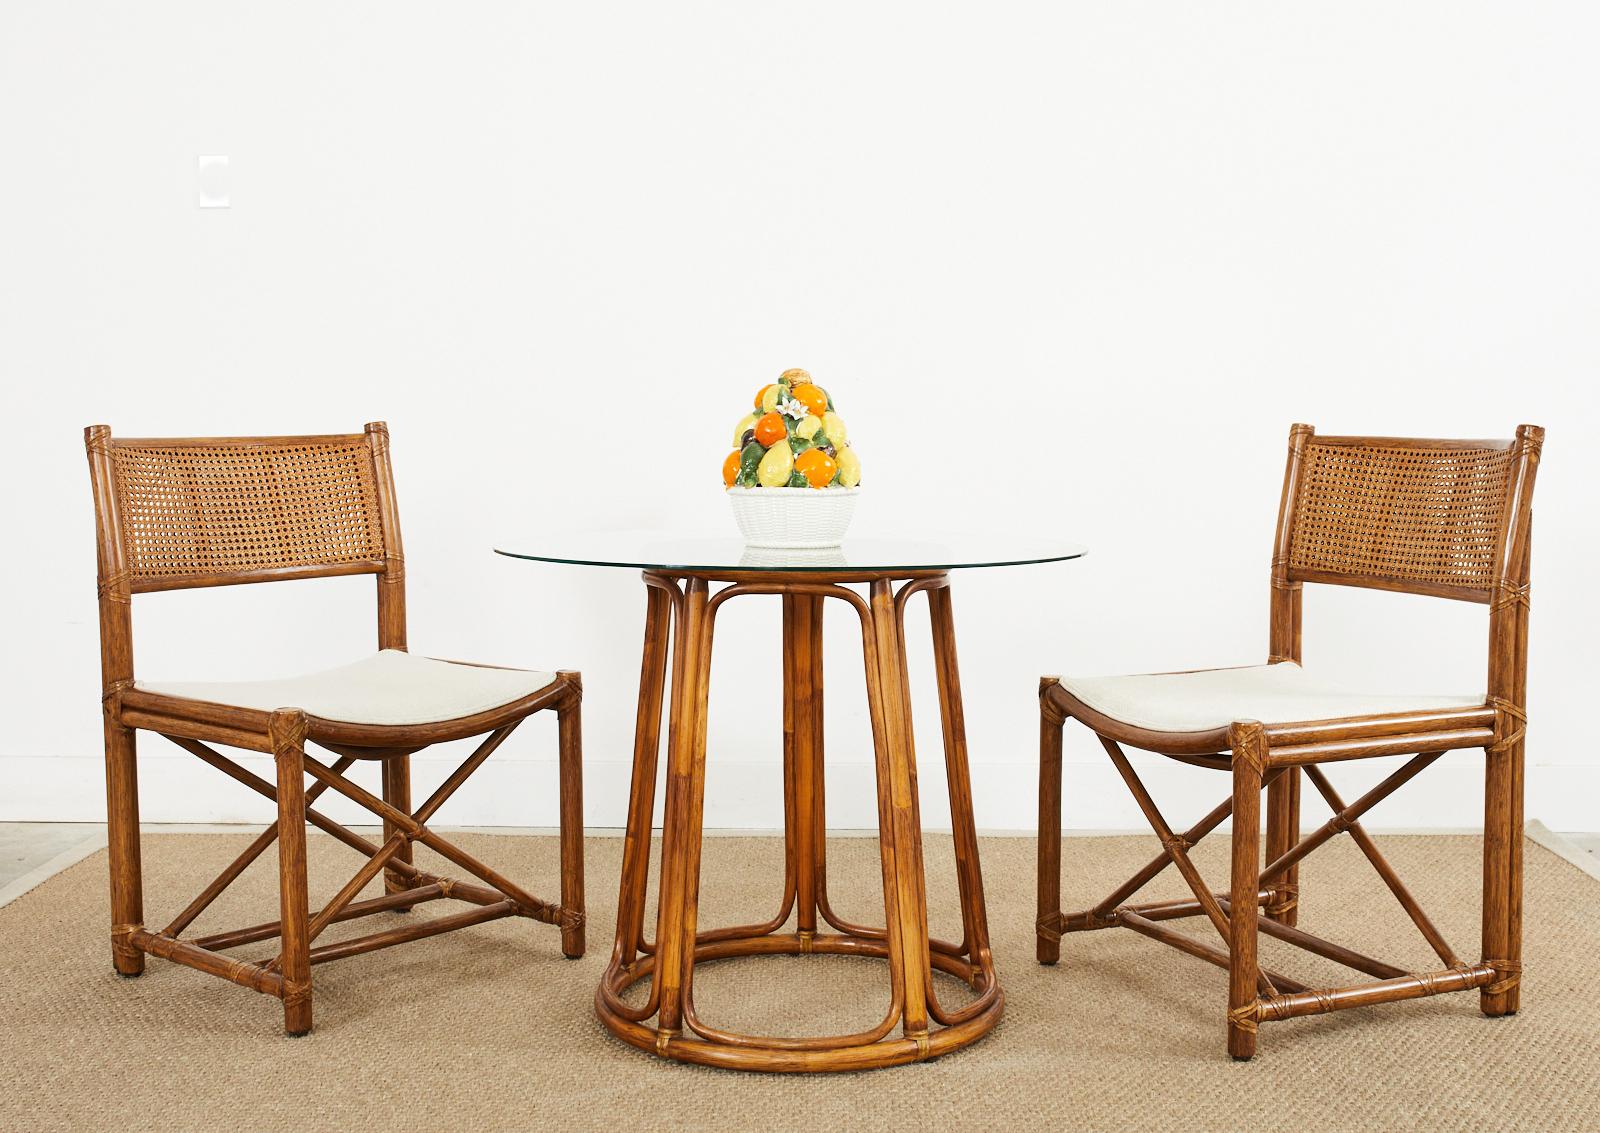 Stylish organic modern rattan table by McGuire. Versatile pedestal table that could serve as a breakfast dining table or an elegant center table. The open design and glass pane top allows for unimpeded views. The tapered form pedestal measures 24